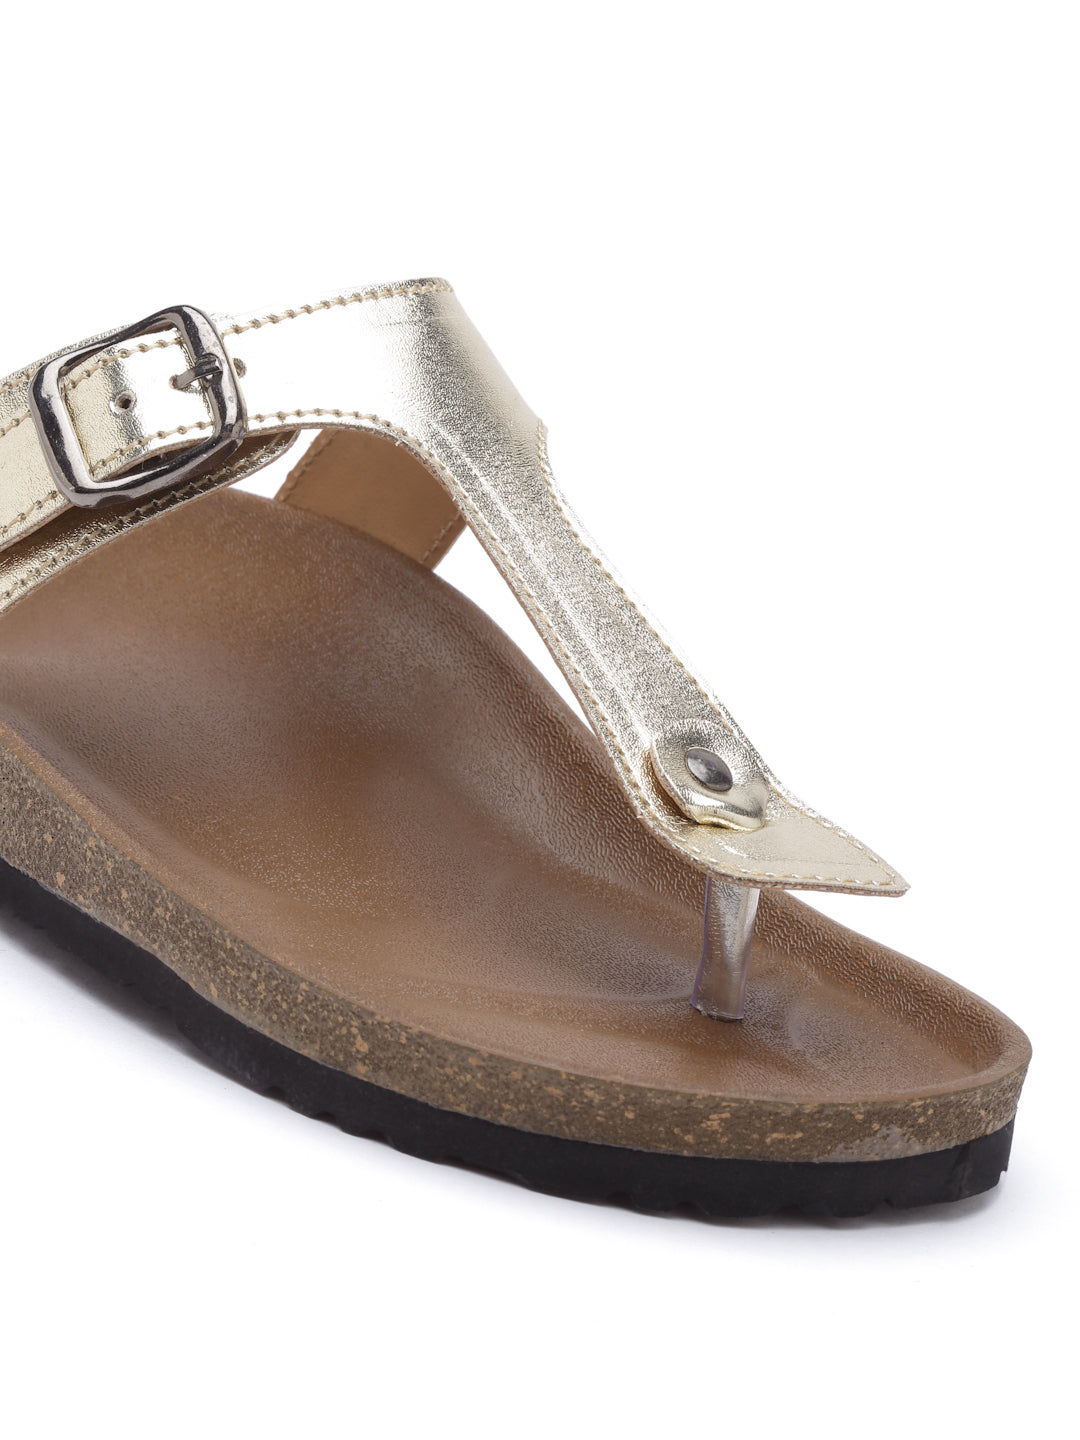 Women's Outdoor Stylish Gold Synthetic Leather Casual Sandal